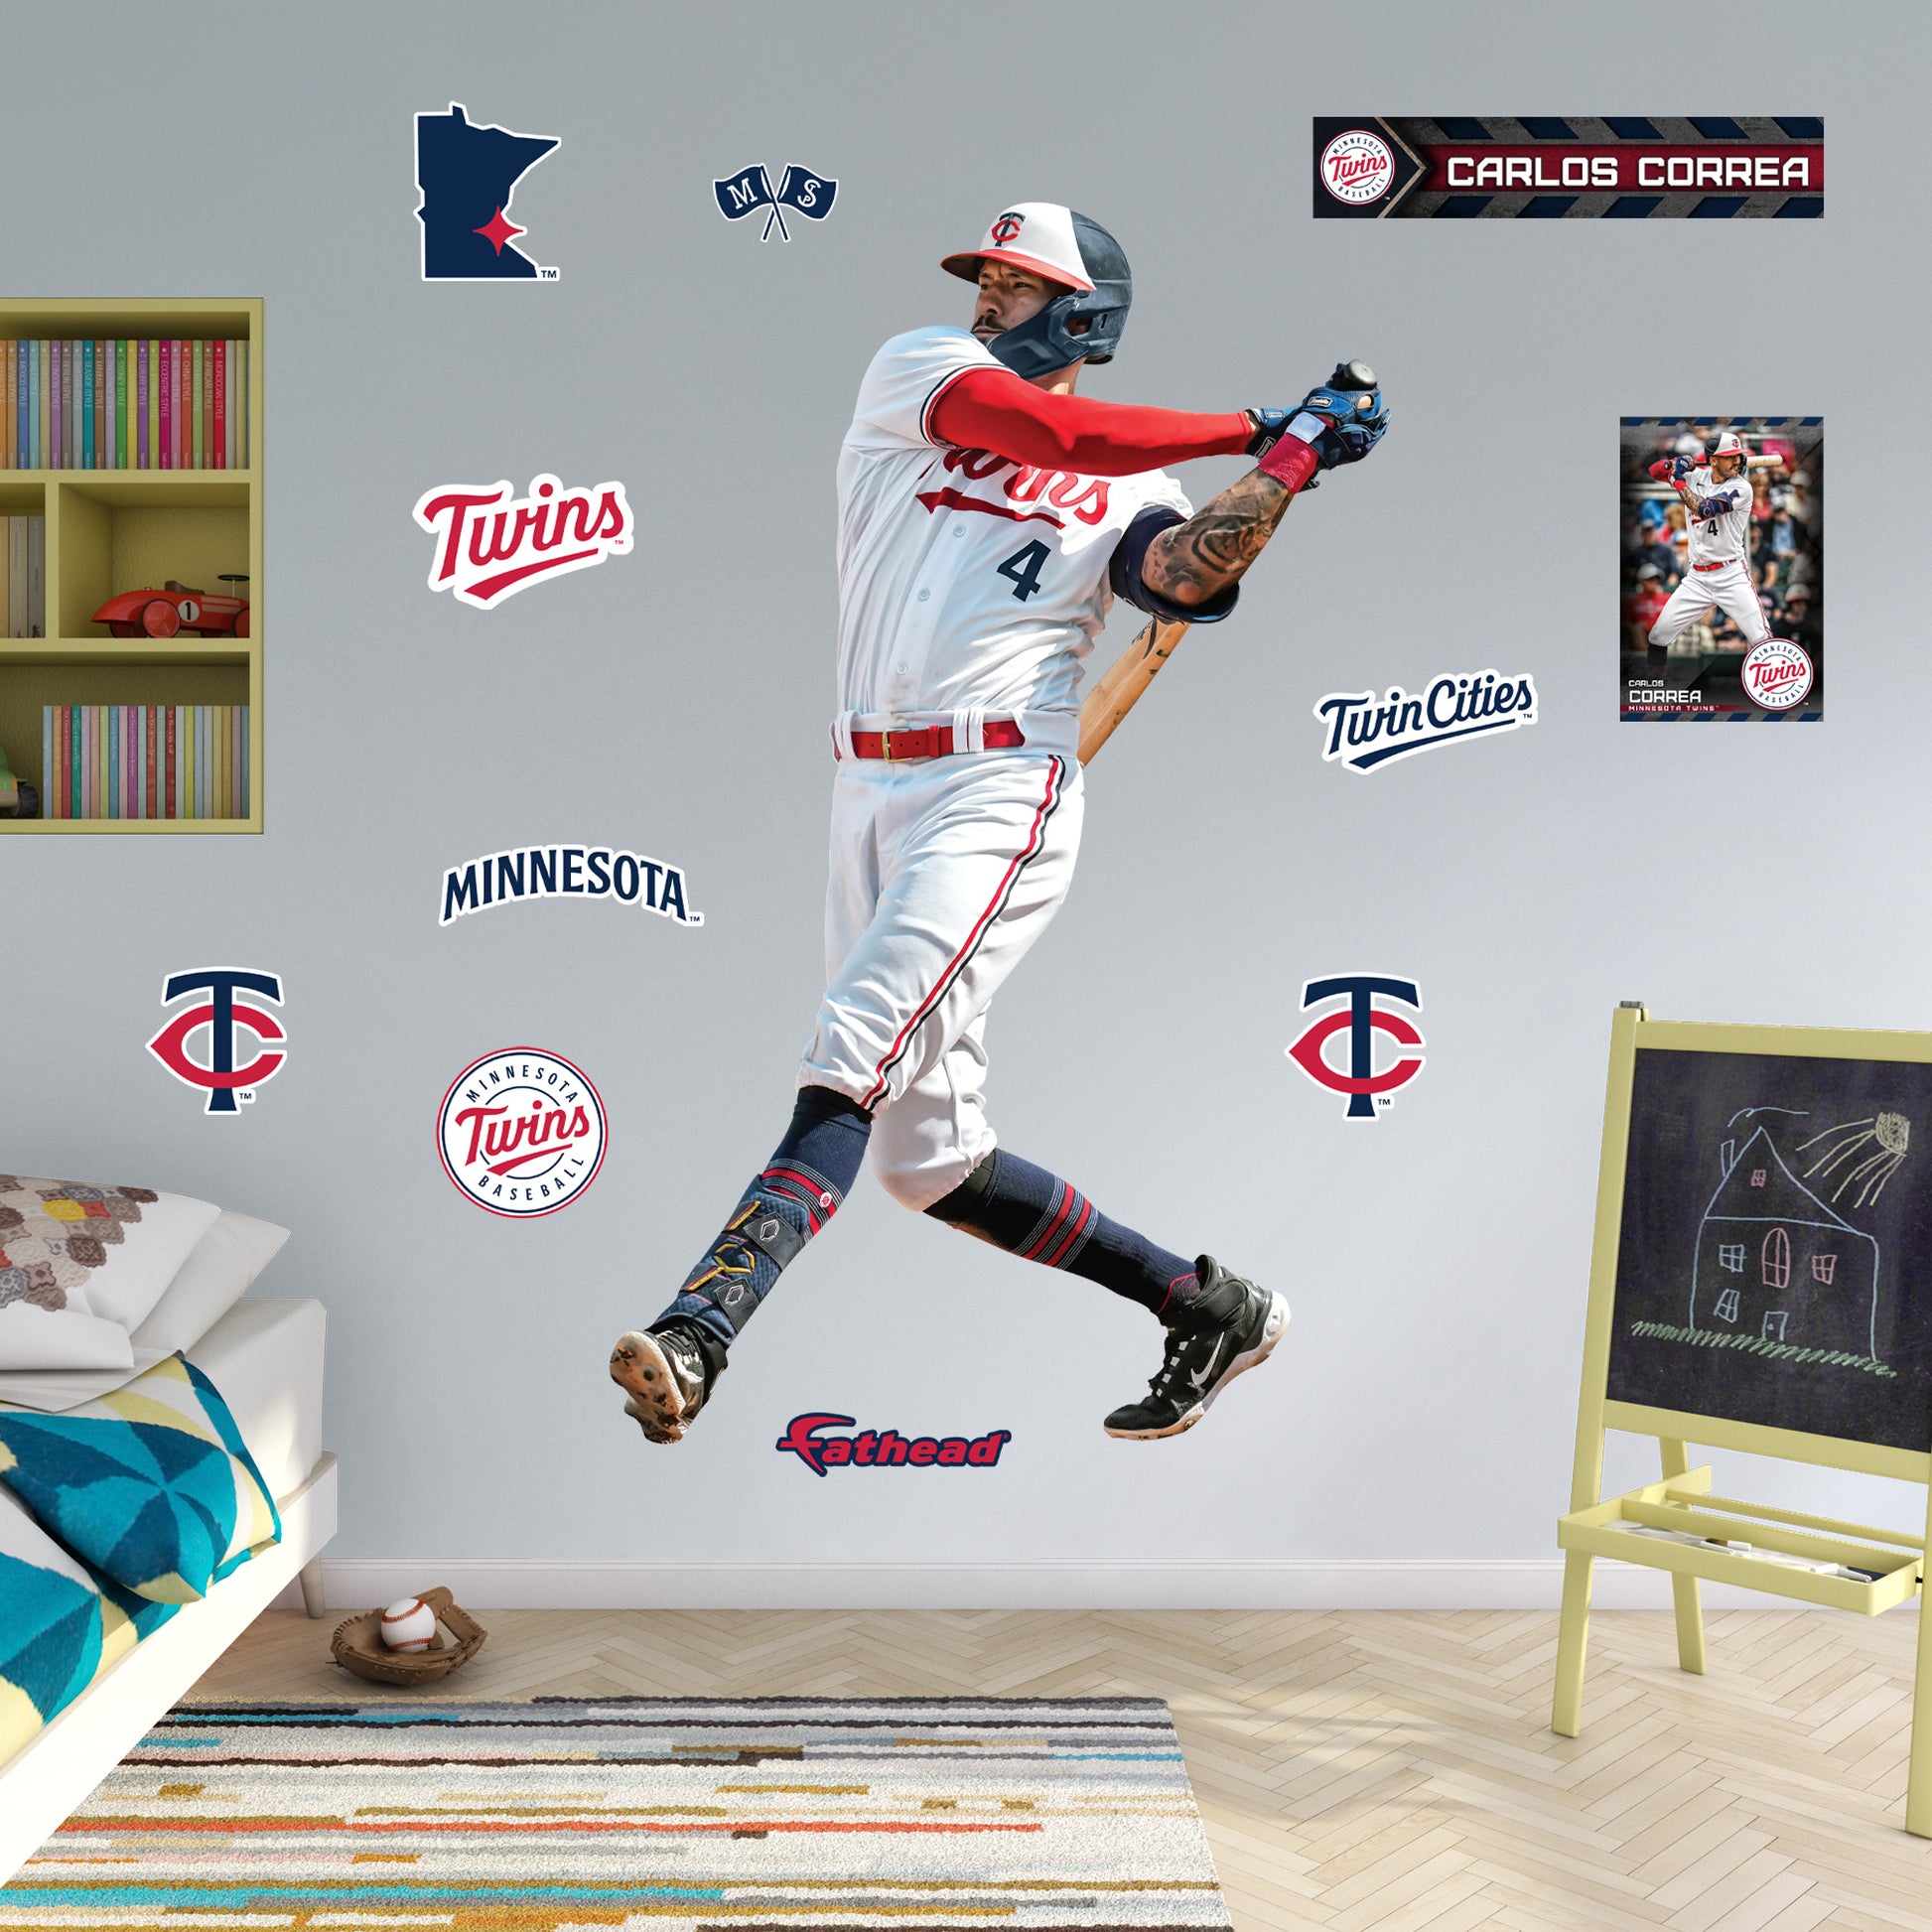 Minnesota Twins: Carlos Correa 2022 Poster - Officially Licensed MLB R